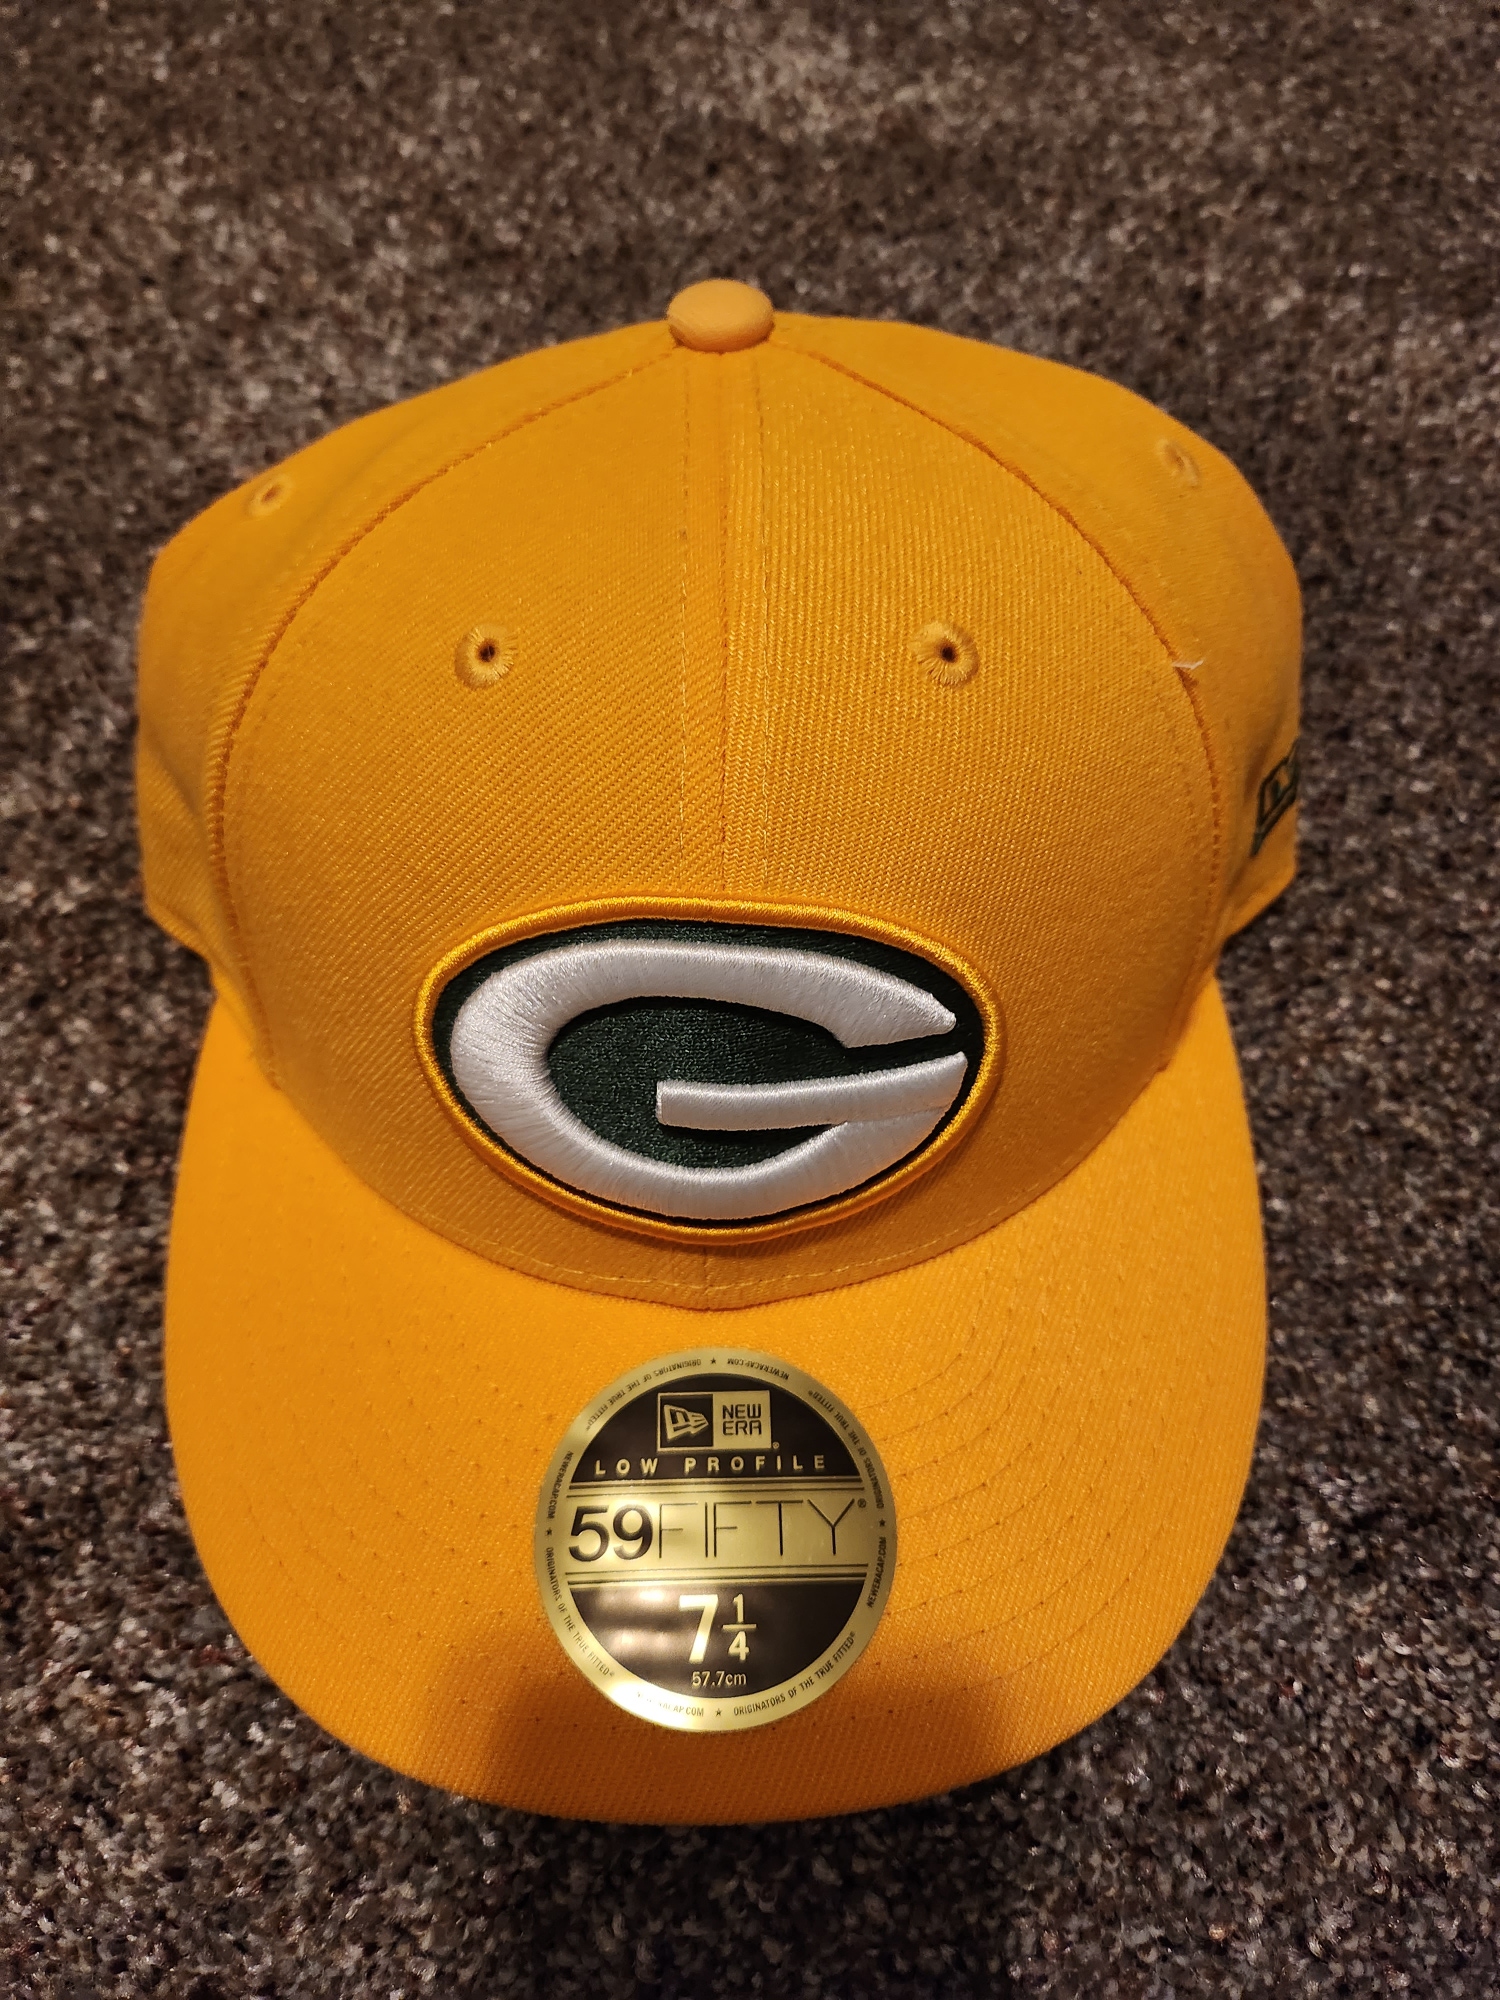 New Yellow Packers Hat